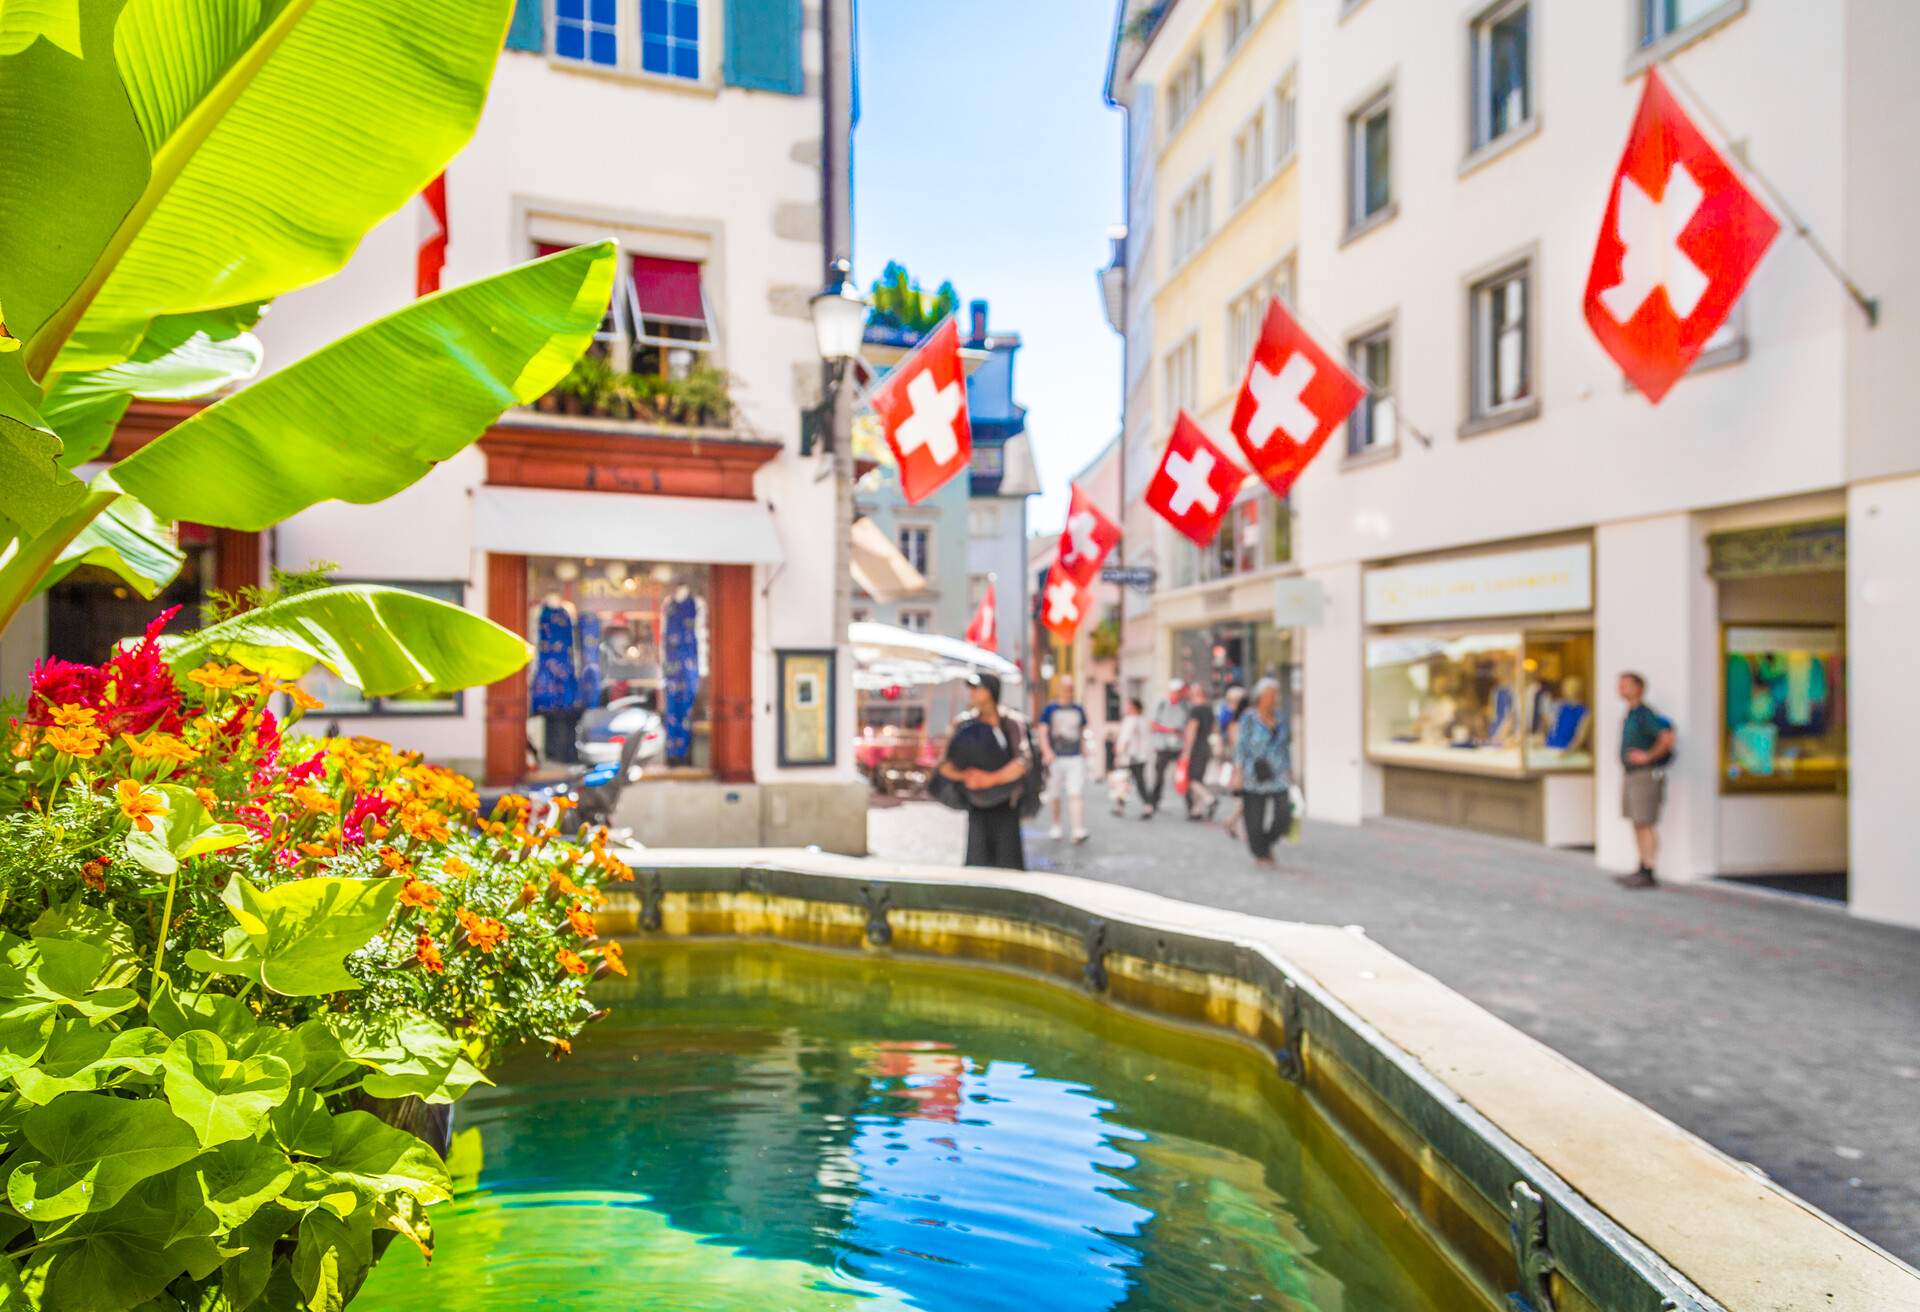 Historic city center of Zurich with Swiss flags hanging from buildings with bokeh background blur effect on a sunny day in summer, Switzerland.